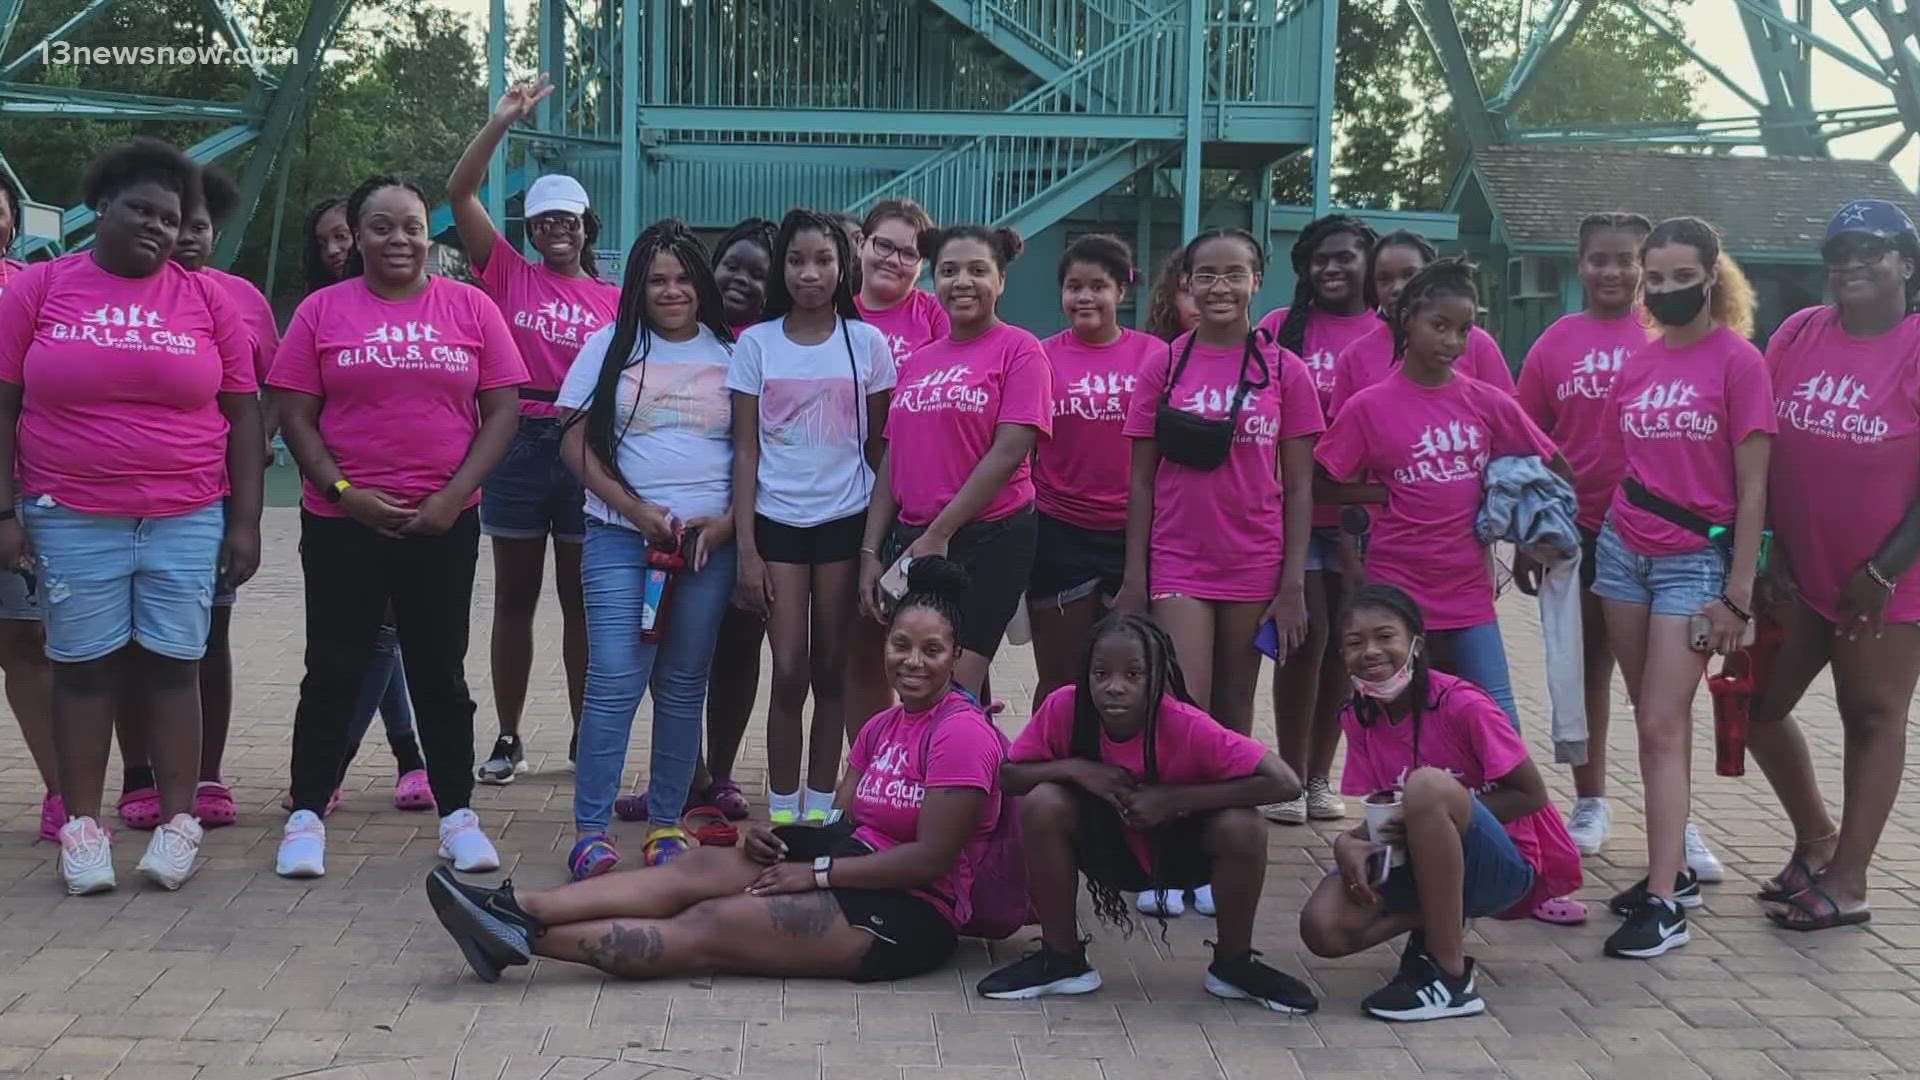 Norview Middle School Assistant Principal Chekesha White is clearing a path to success for young girls through her mentoring program, G.I.R.L.S. Club.